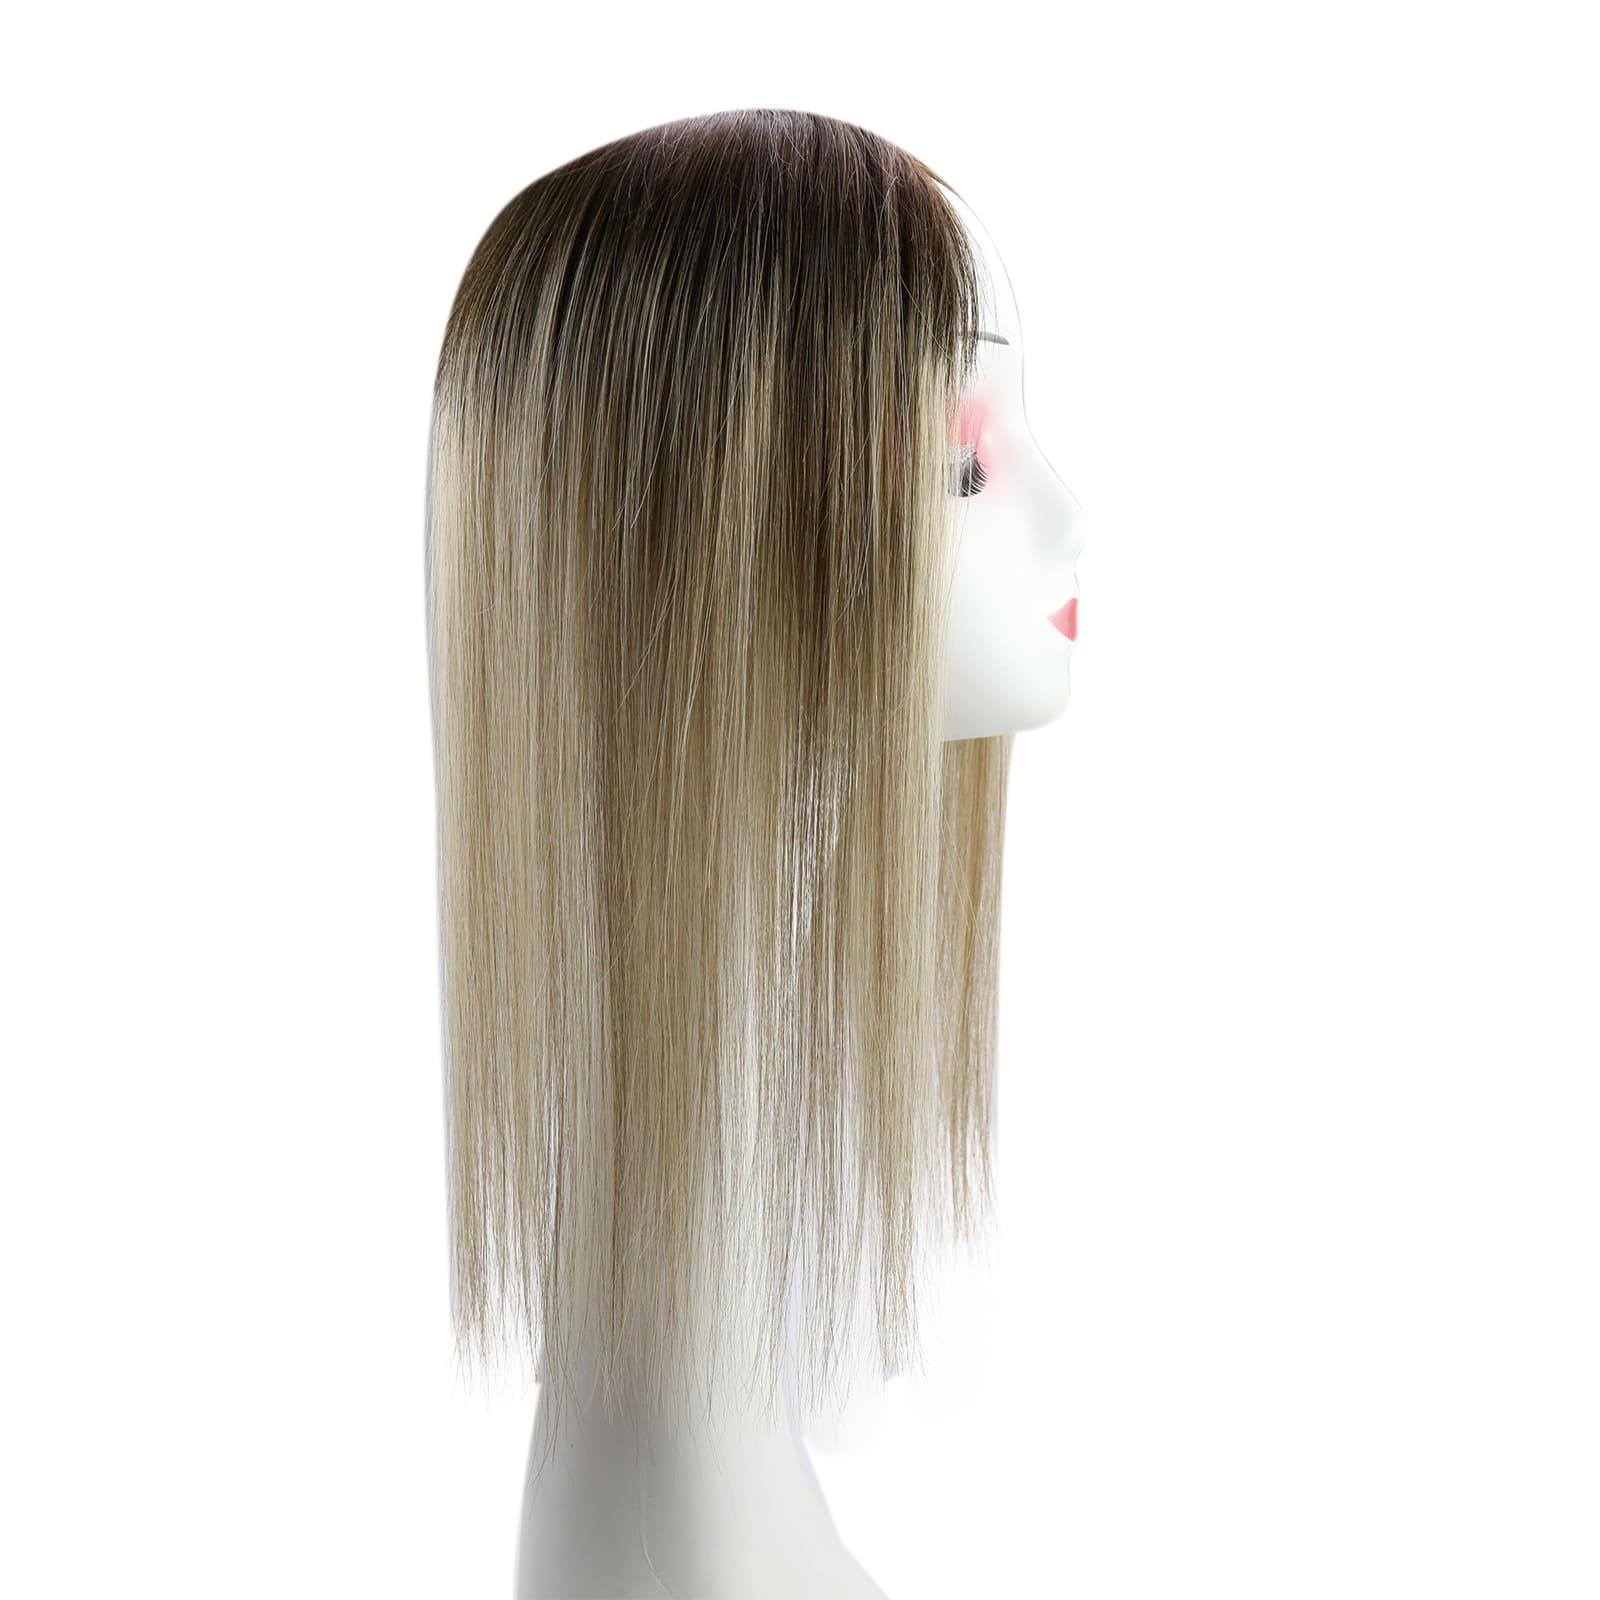 hair toppers hair piece blonde ombre brown